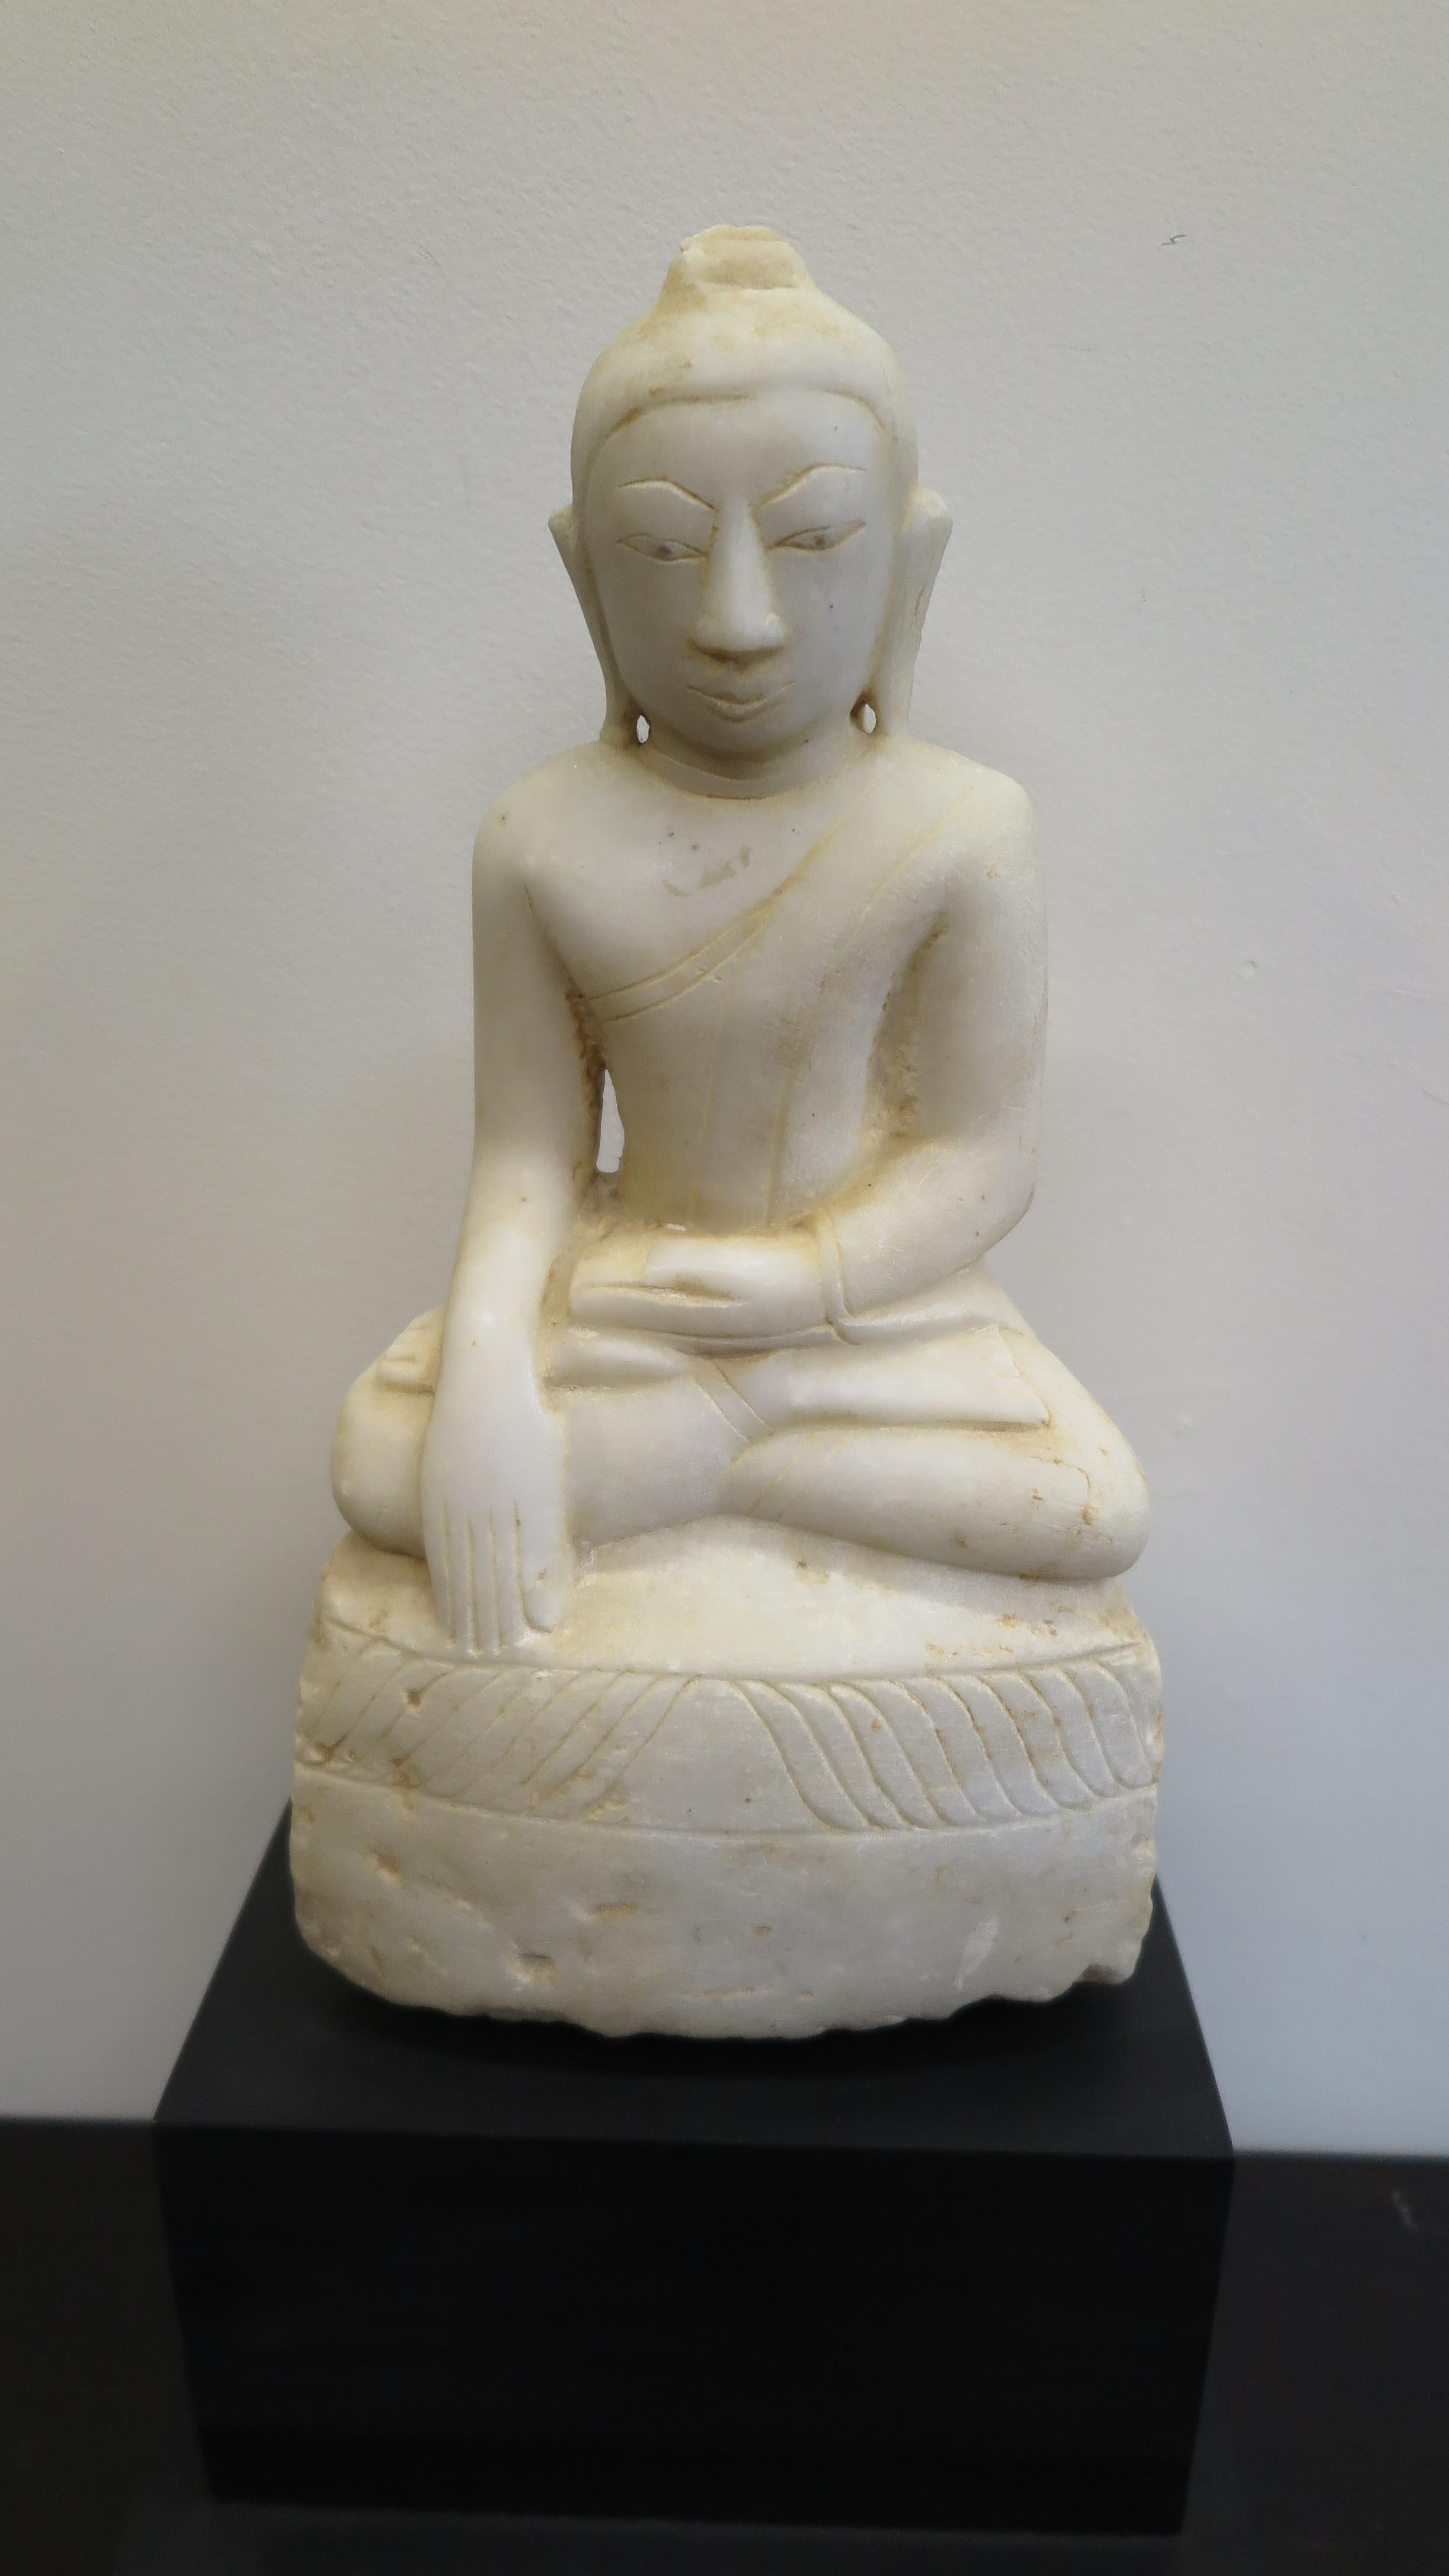 18th/19th century Buddha Statue carved of Alabaster. Burmese Shan Buddha Statue 1800ca, collected in Myanmar Shan State 1998. Legs crossed, the left hand in the lap, and the right hand pointing to the ground with the palm facing inward toward the